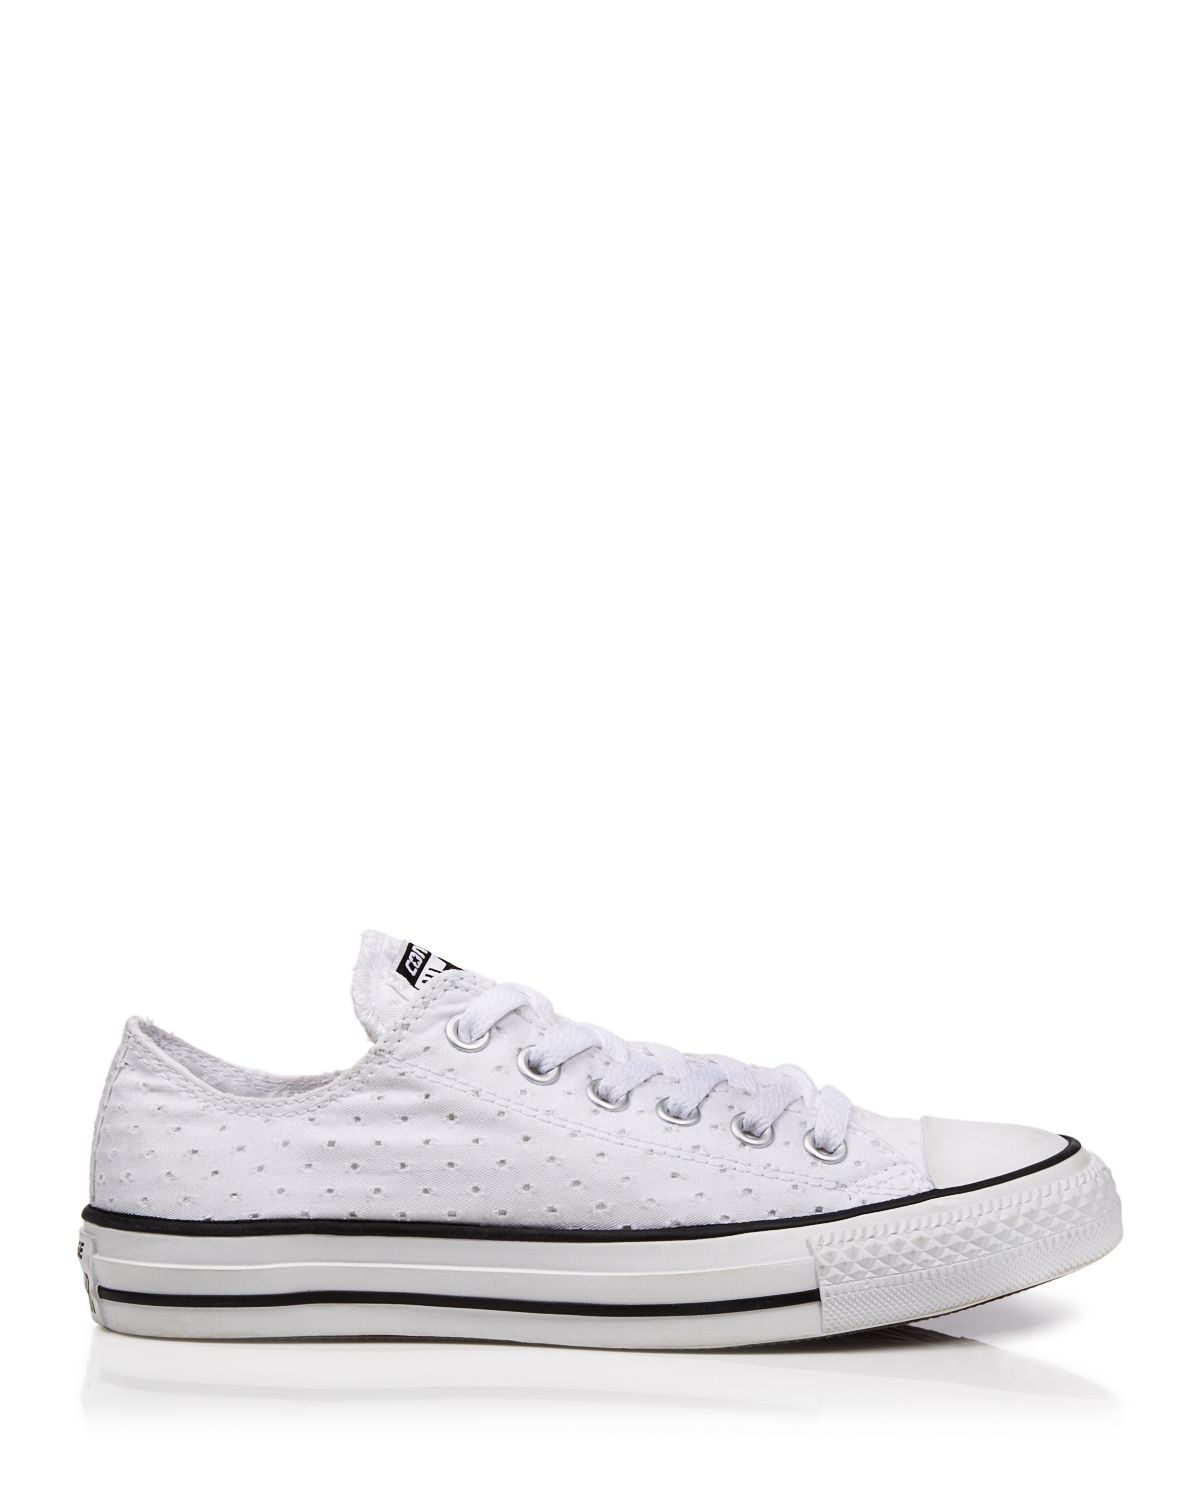 lace converse low tops